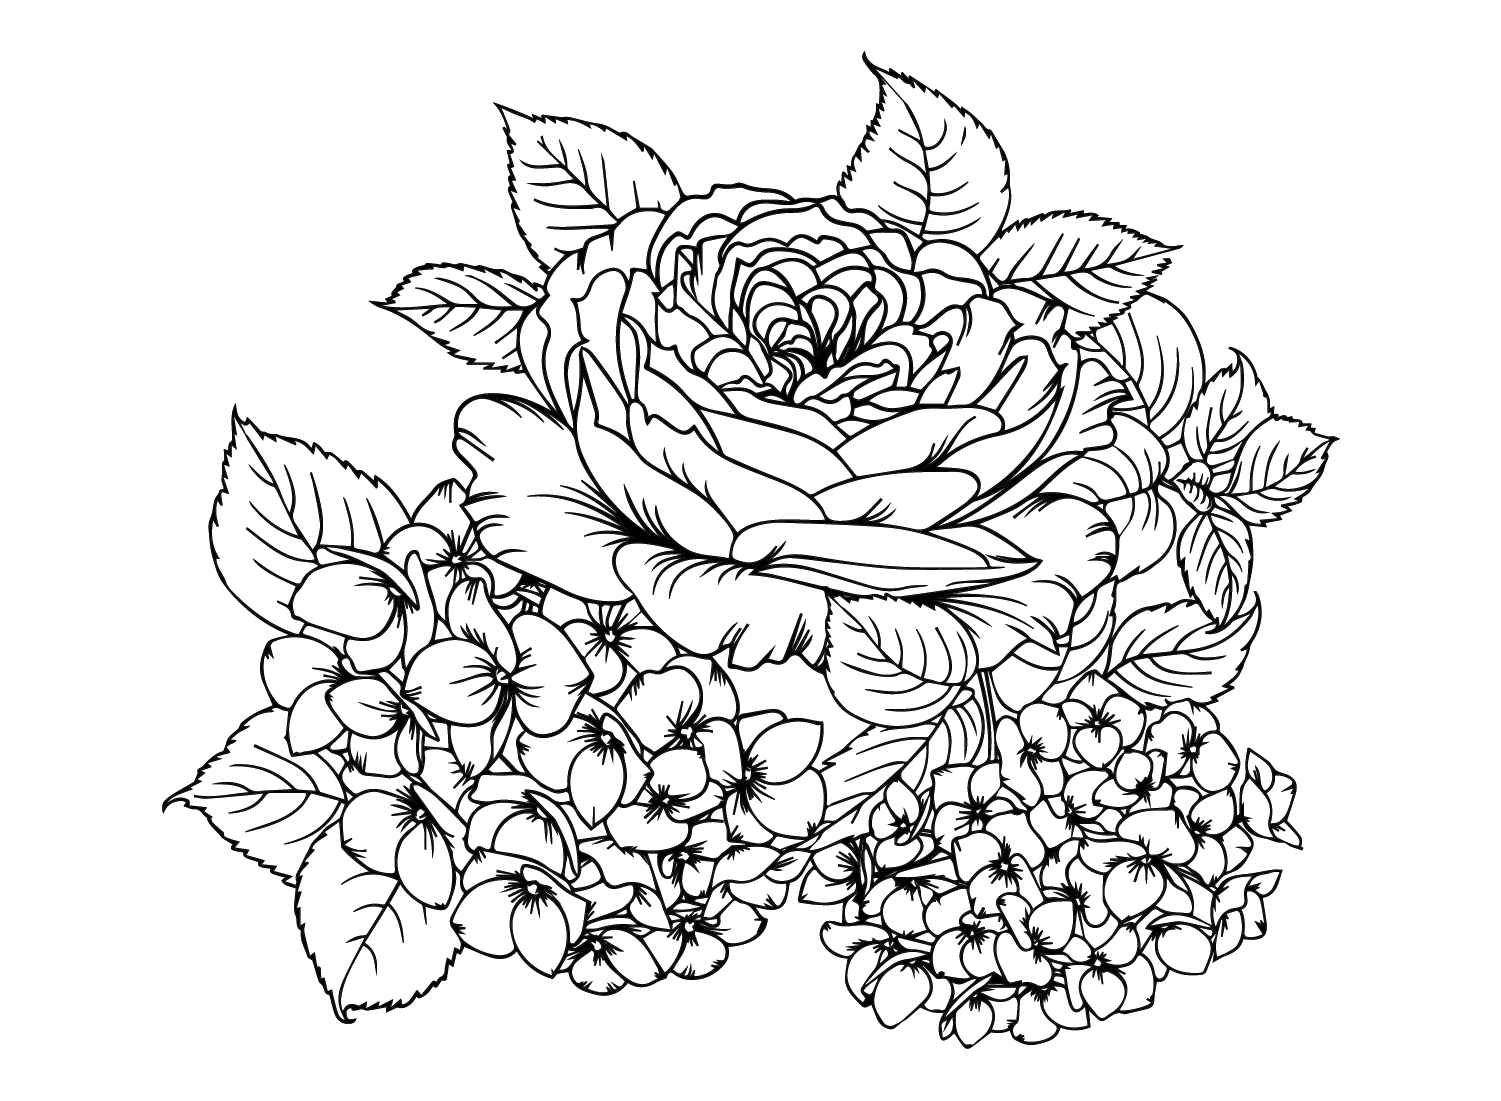 The Mental Health Coloring Page